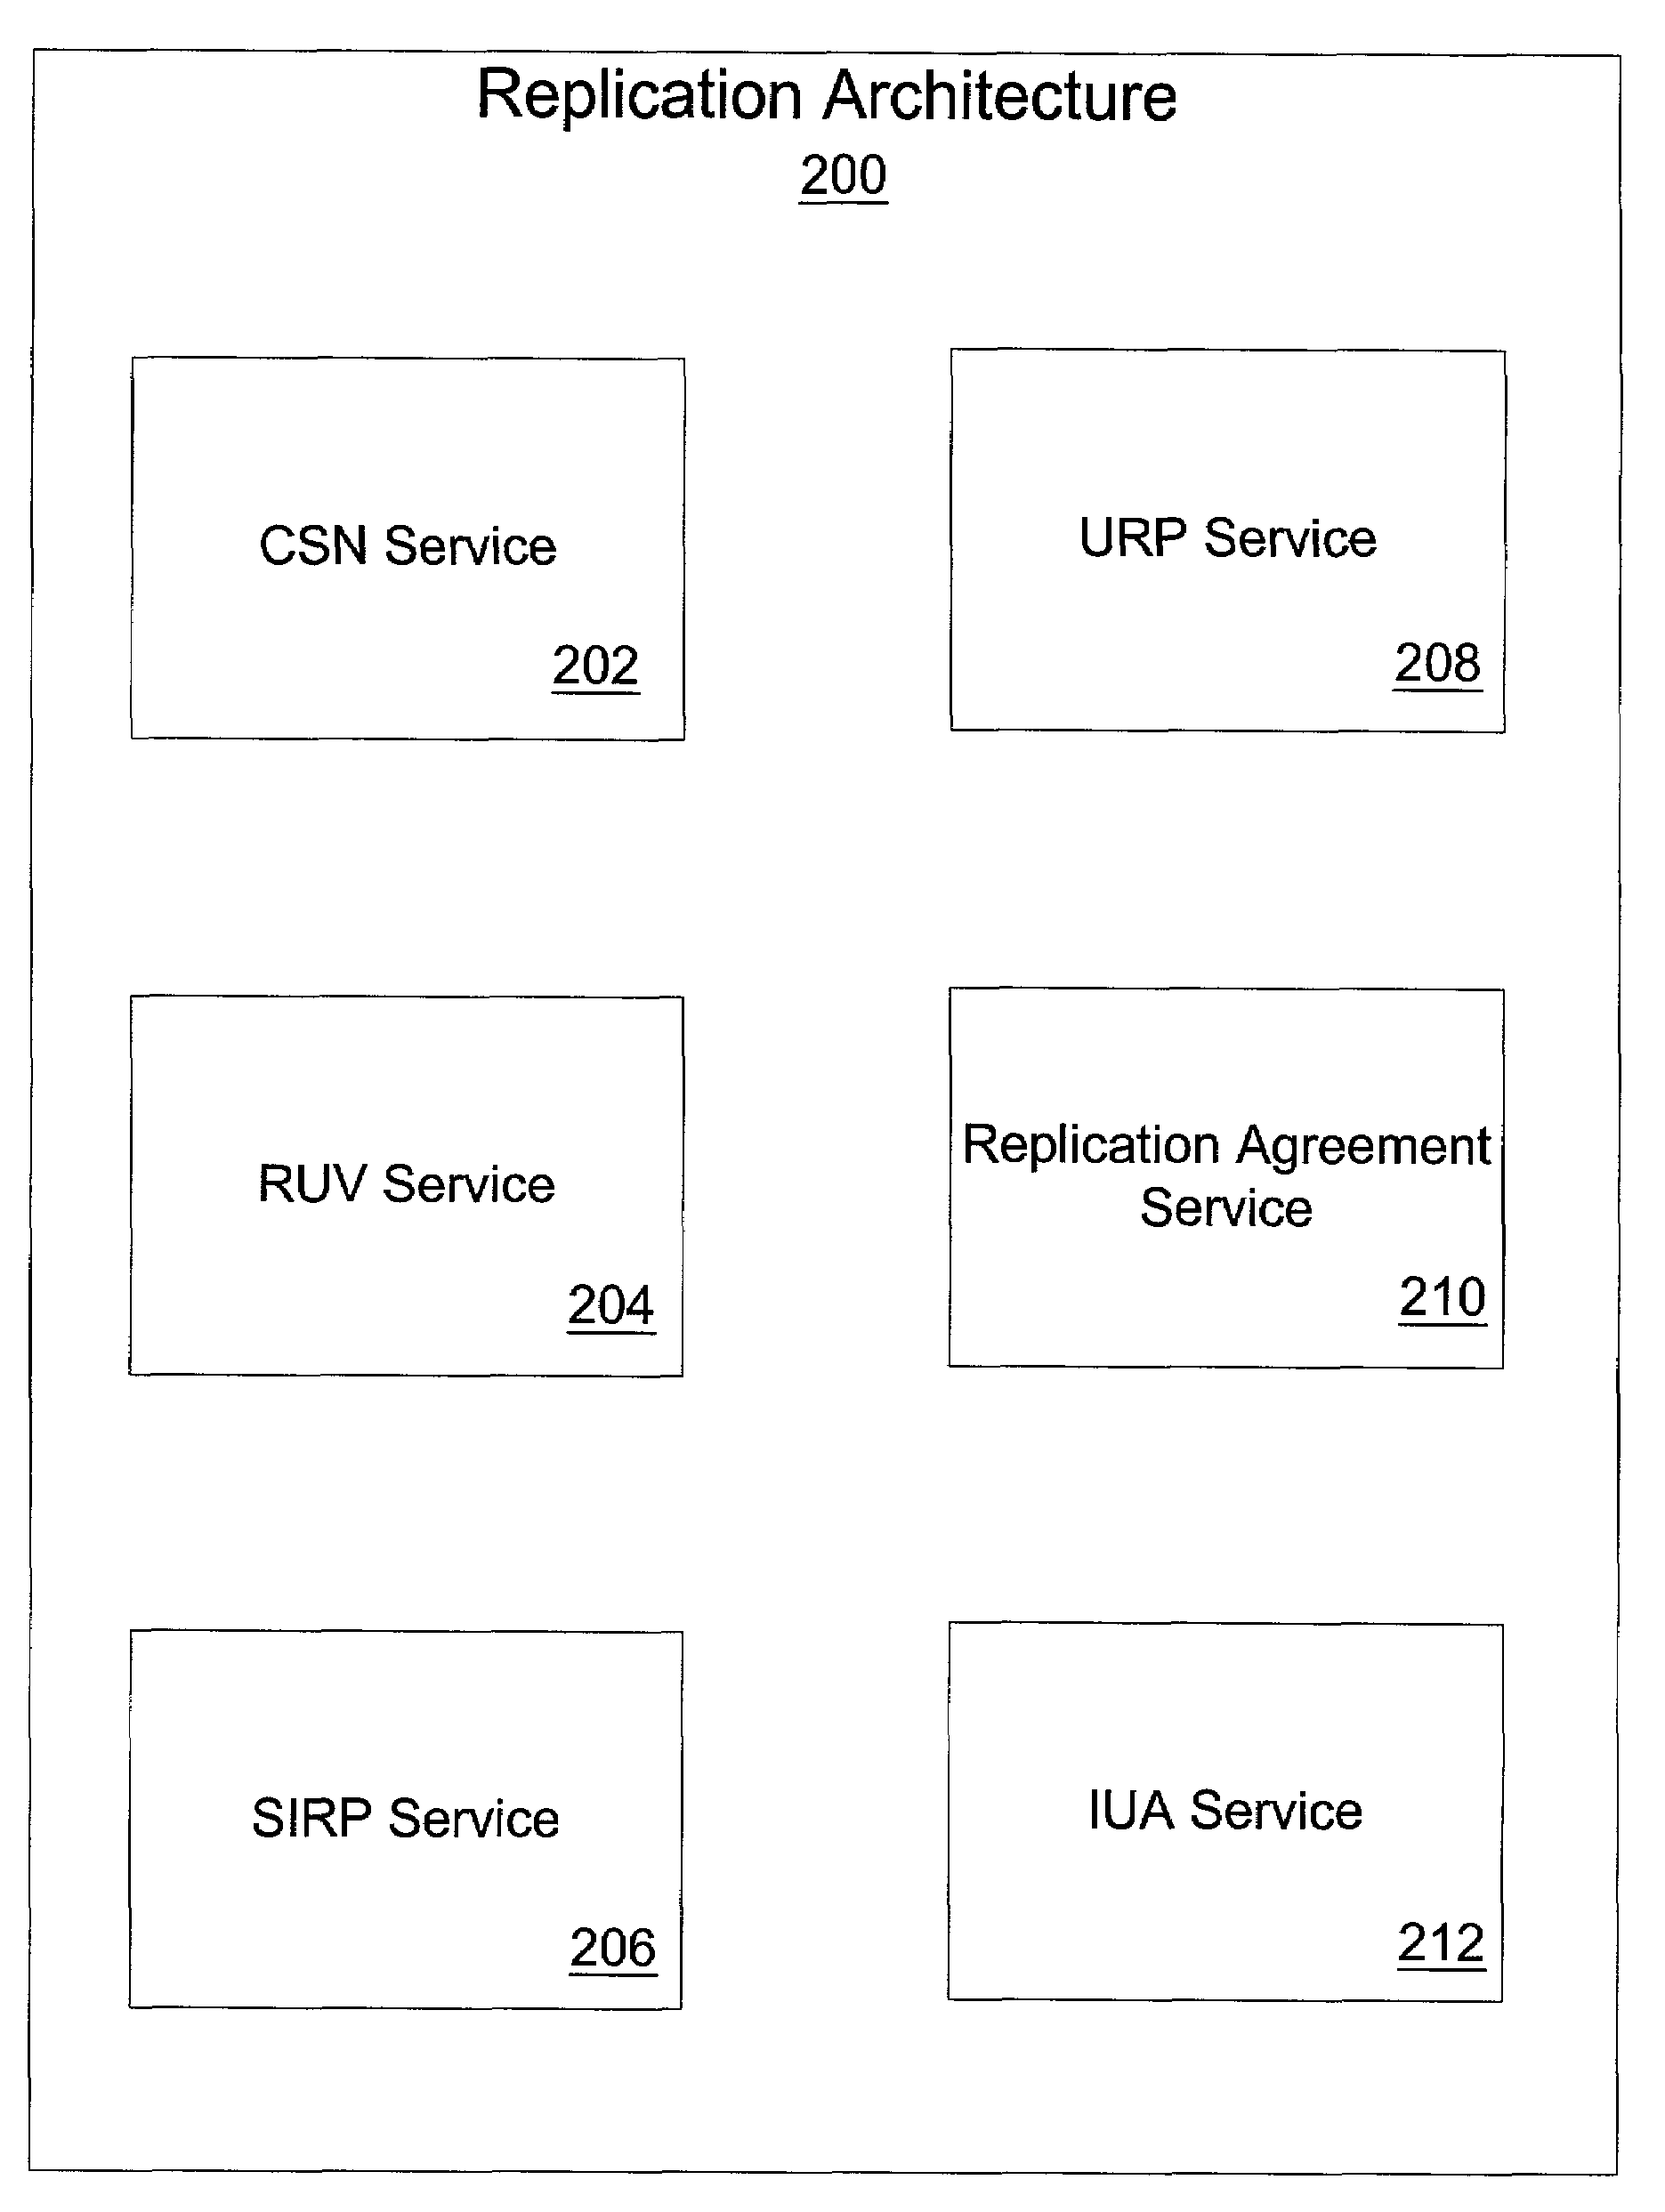 Replication architecture for a directory server